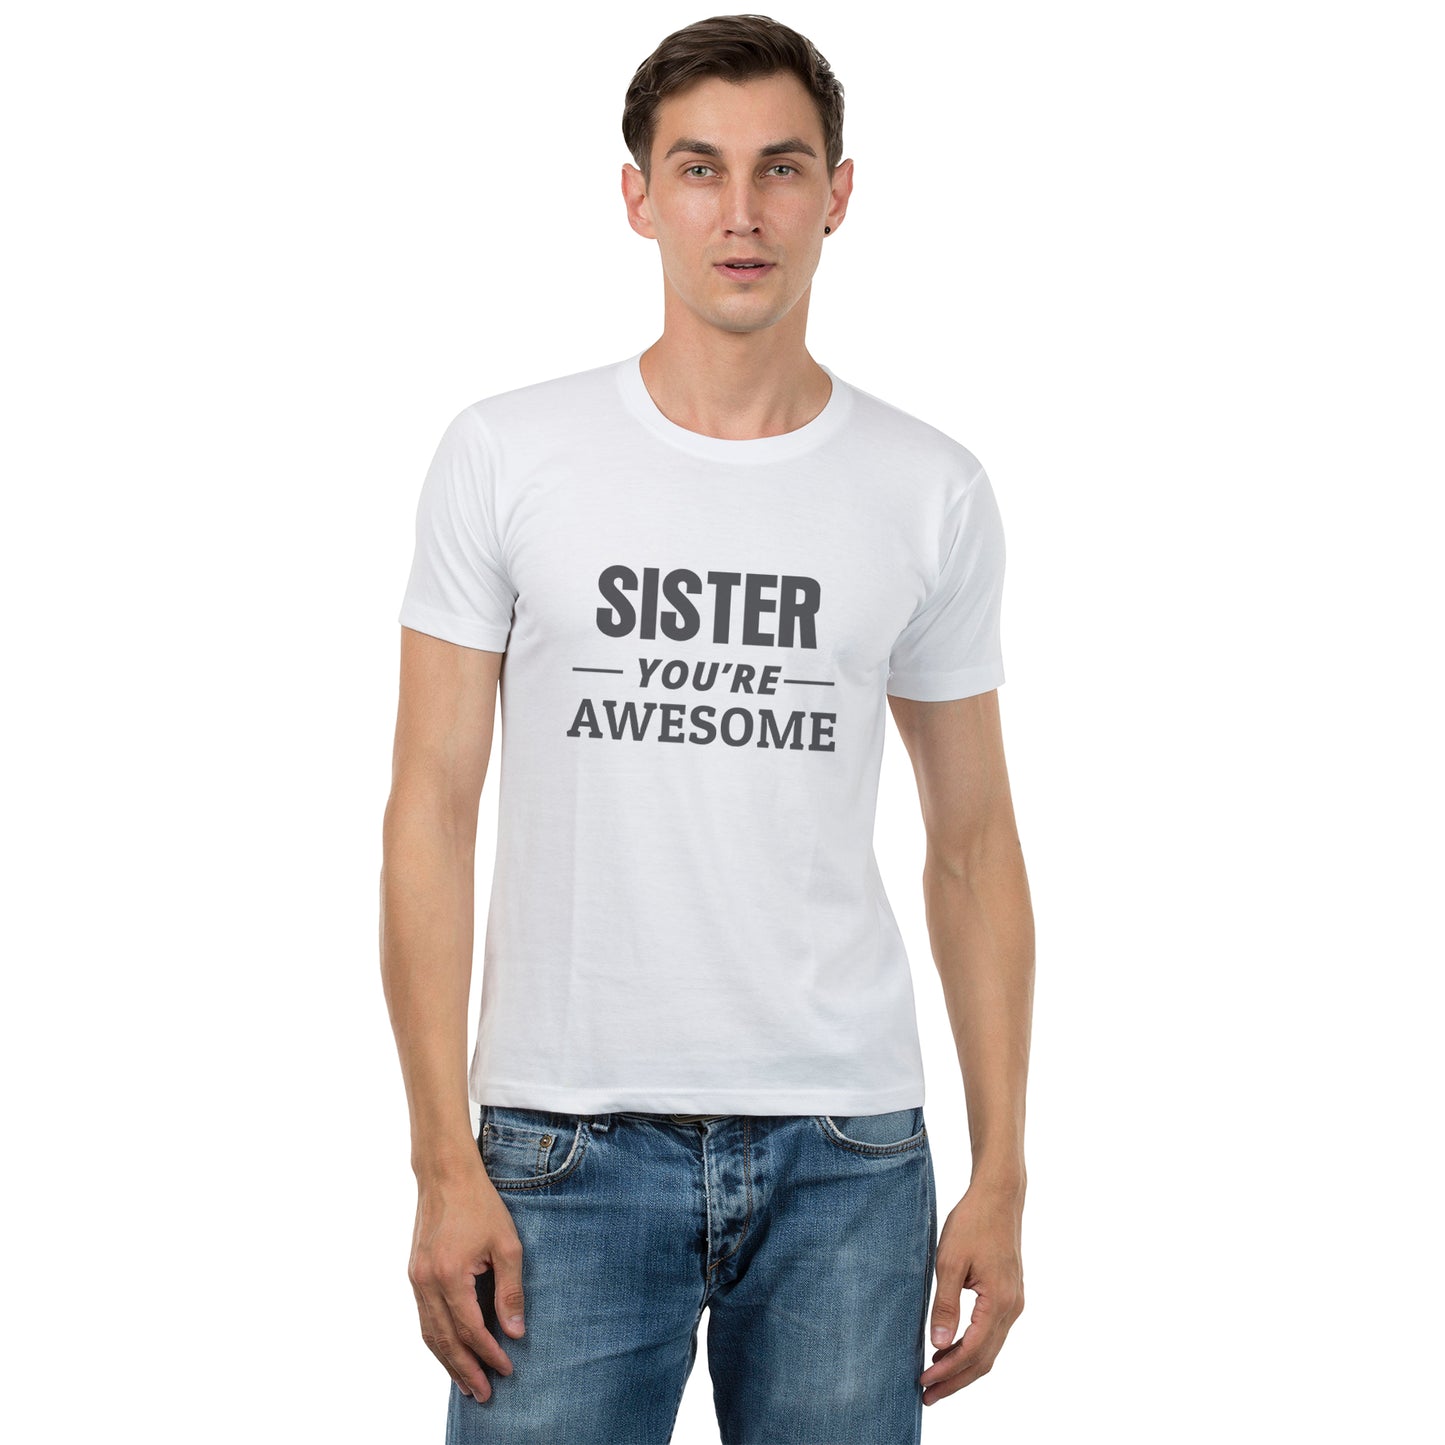 Brother you're awesome- Sister you're awesome matching Sibling t shirts - white